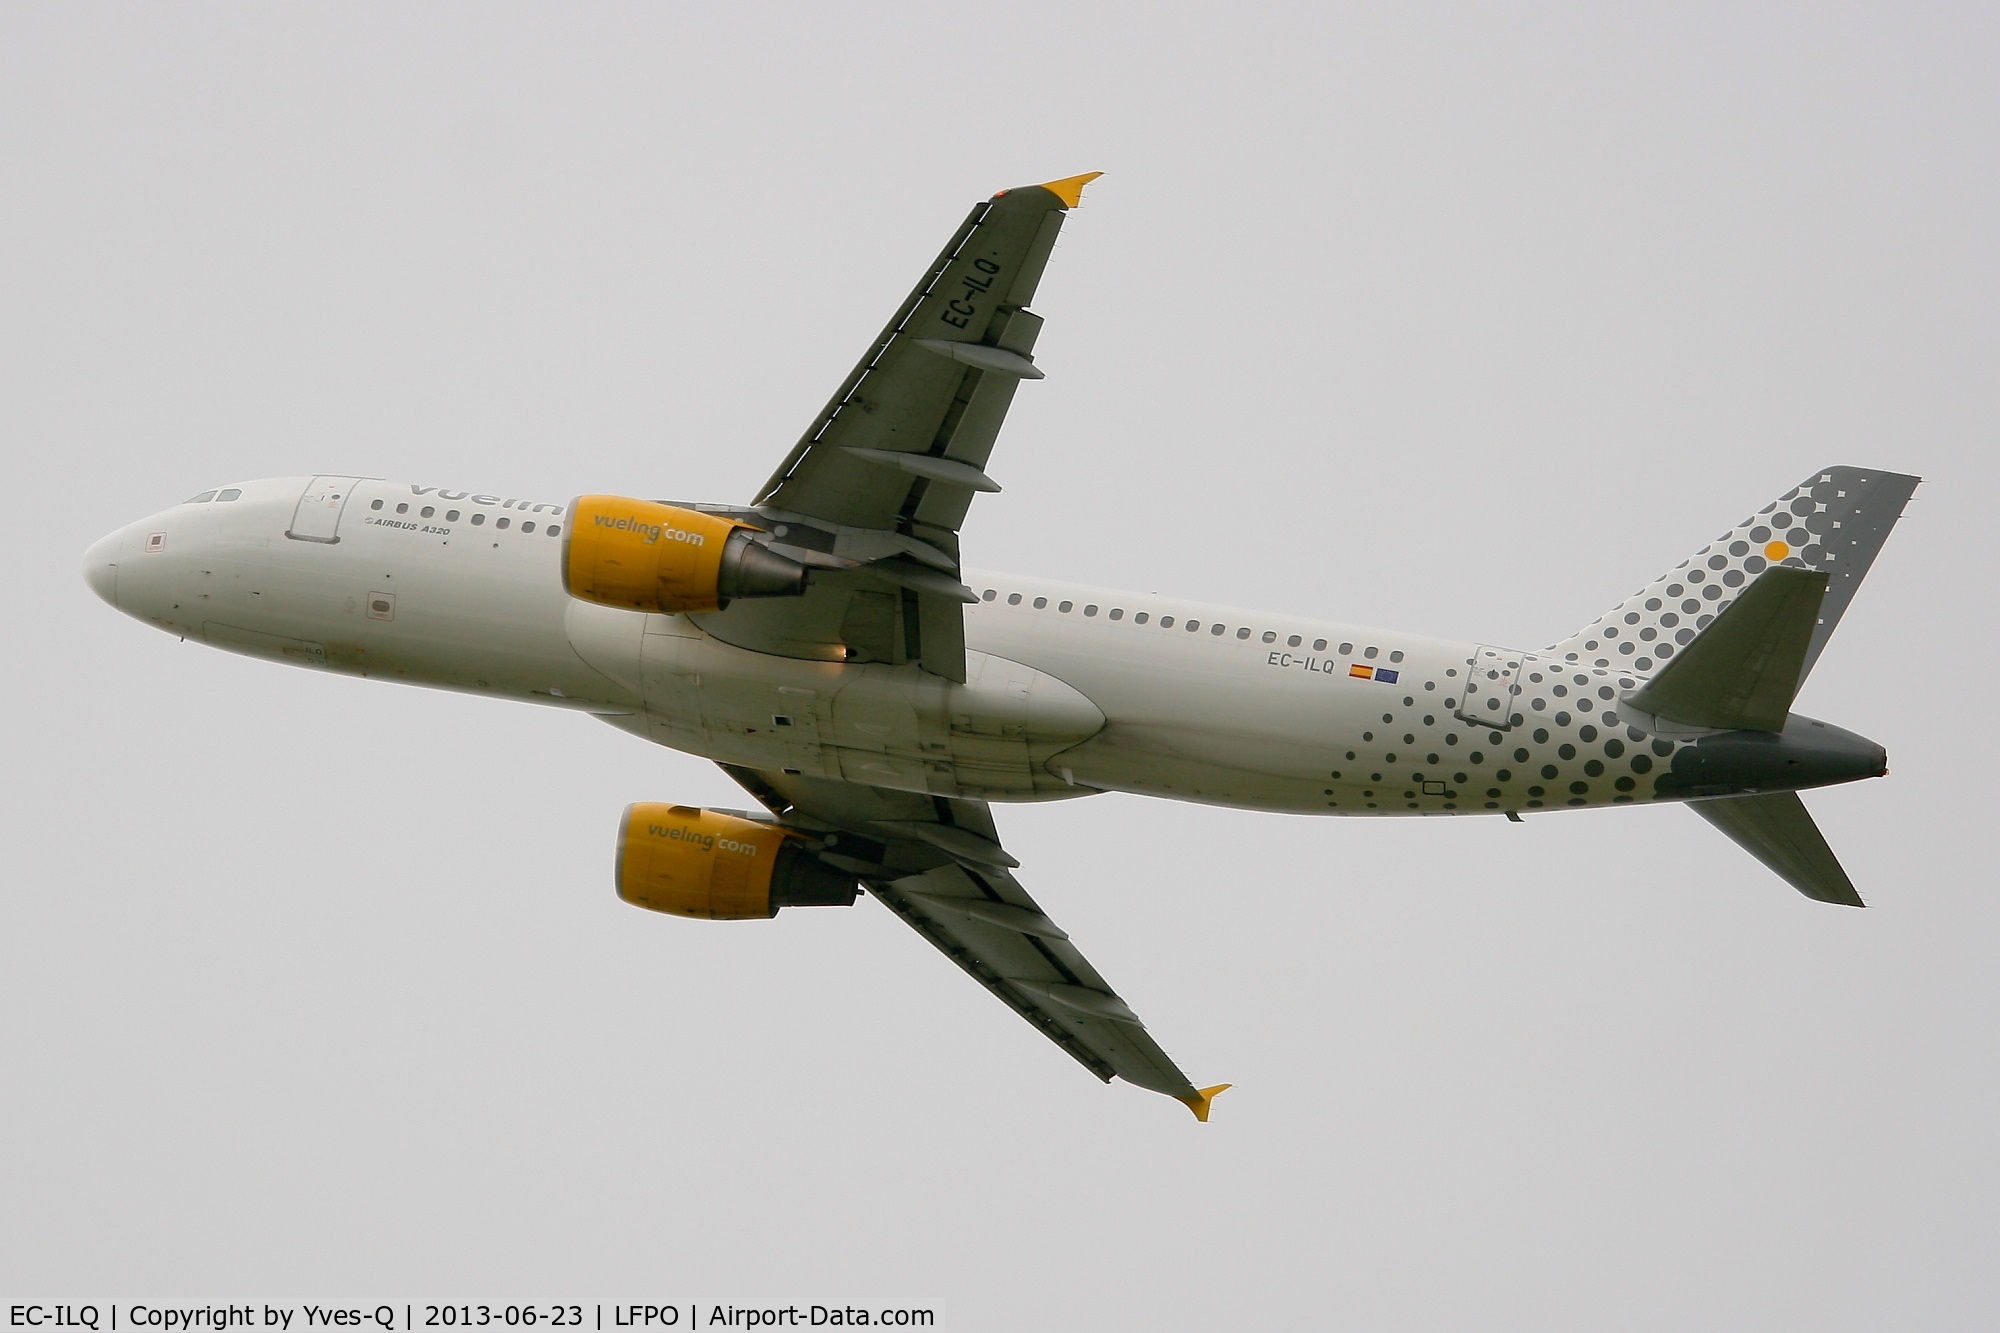 EC-ILQ, 2002 Airbus A320-214 C/N 1736, Airbus A320-214  Takes off  From Rwy 24, Paris-Orly Airport (LFPO-ORY)